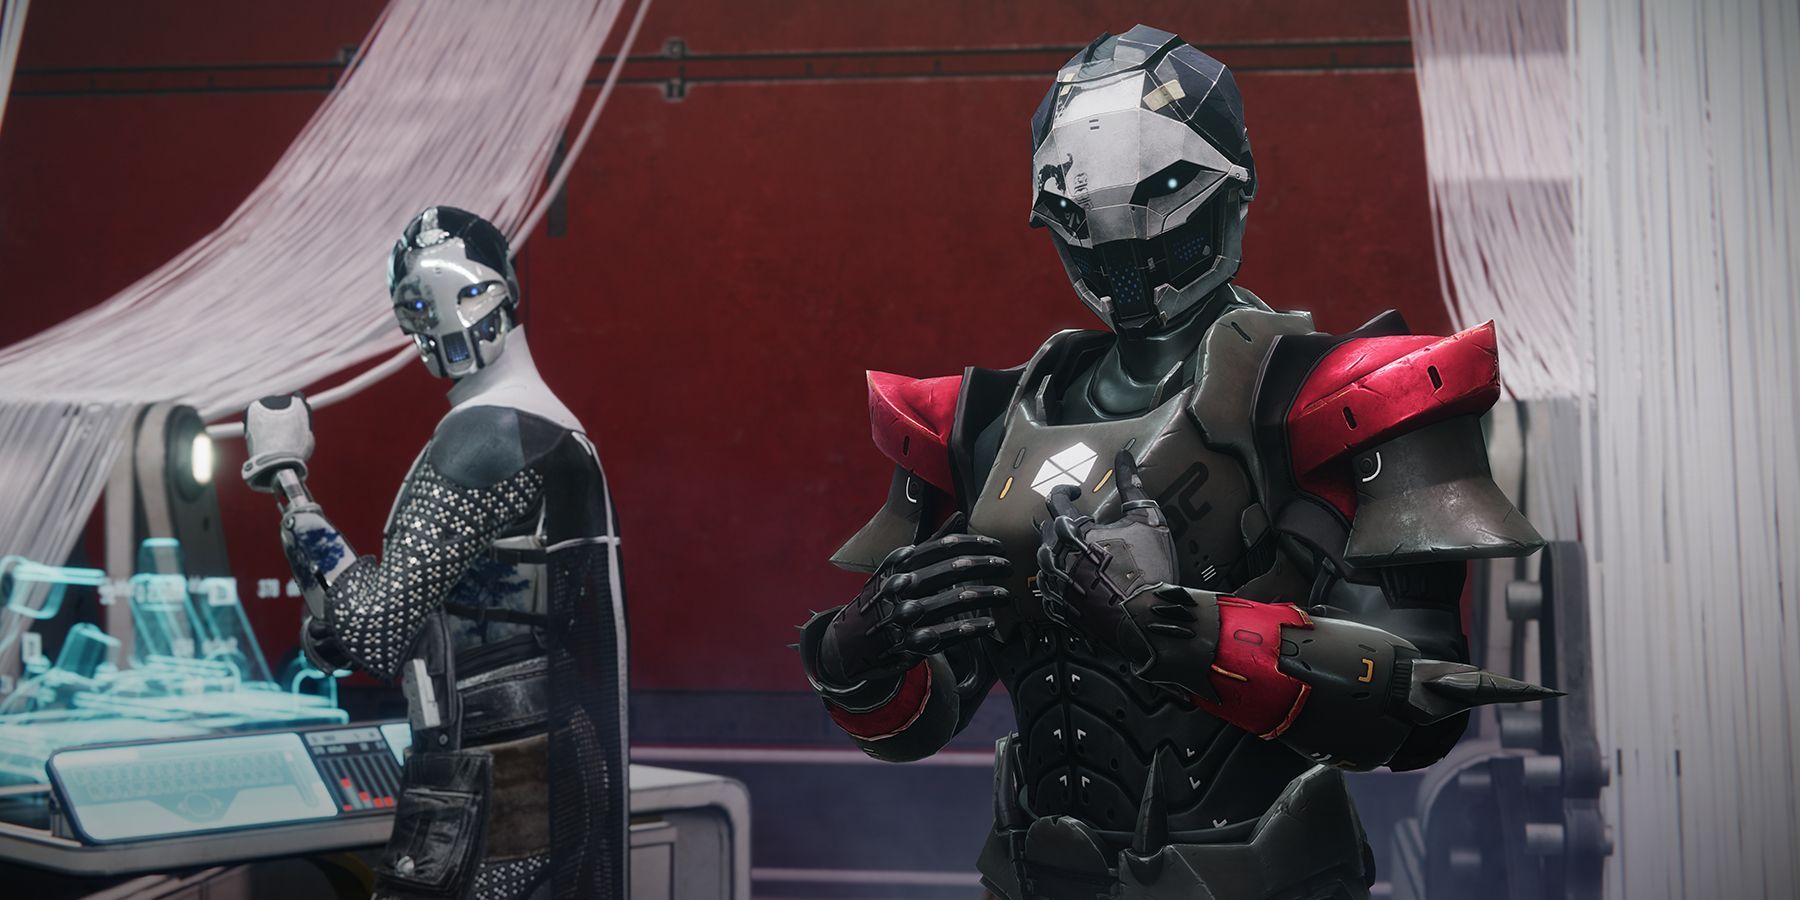 Aida-1 next to a Guardian wearing and Aida-1 mask from Festival of the Lost in Destiny 2.